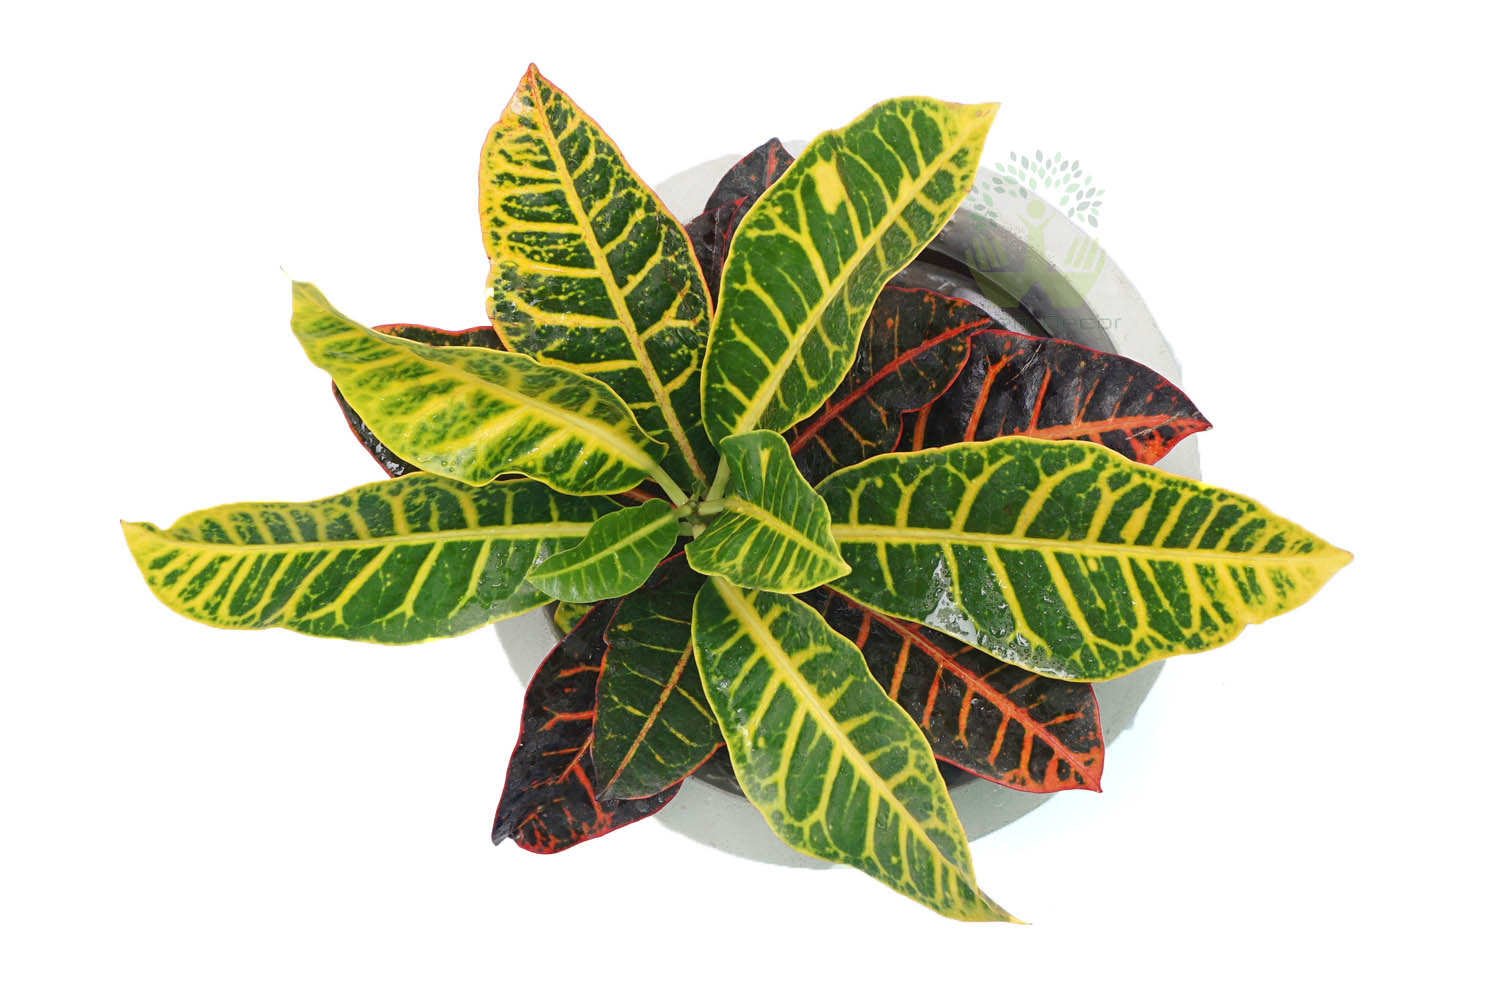 Buy Croton Variegatum Petra Plants , White Pots and seeds in Delhi NCR by the best online nursery shop Greendecor.